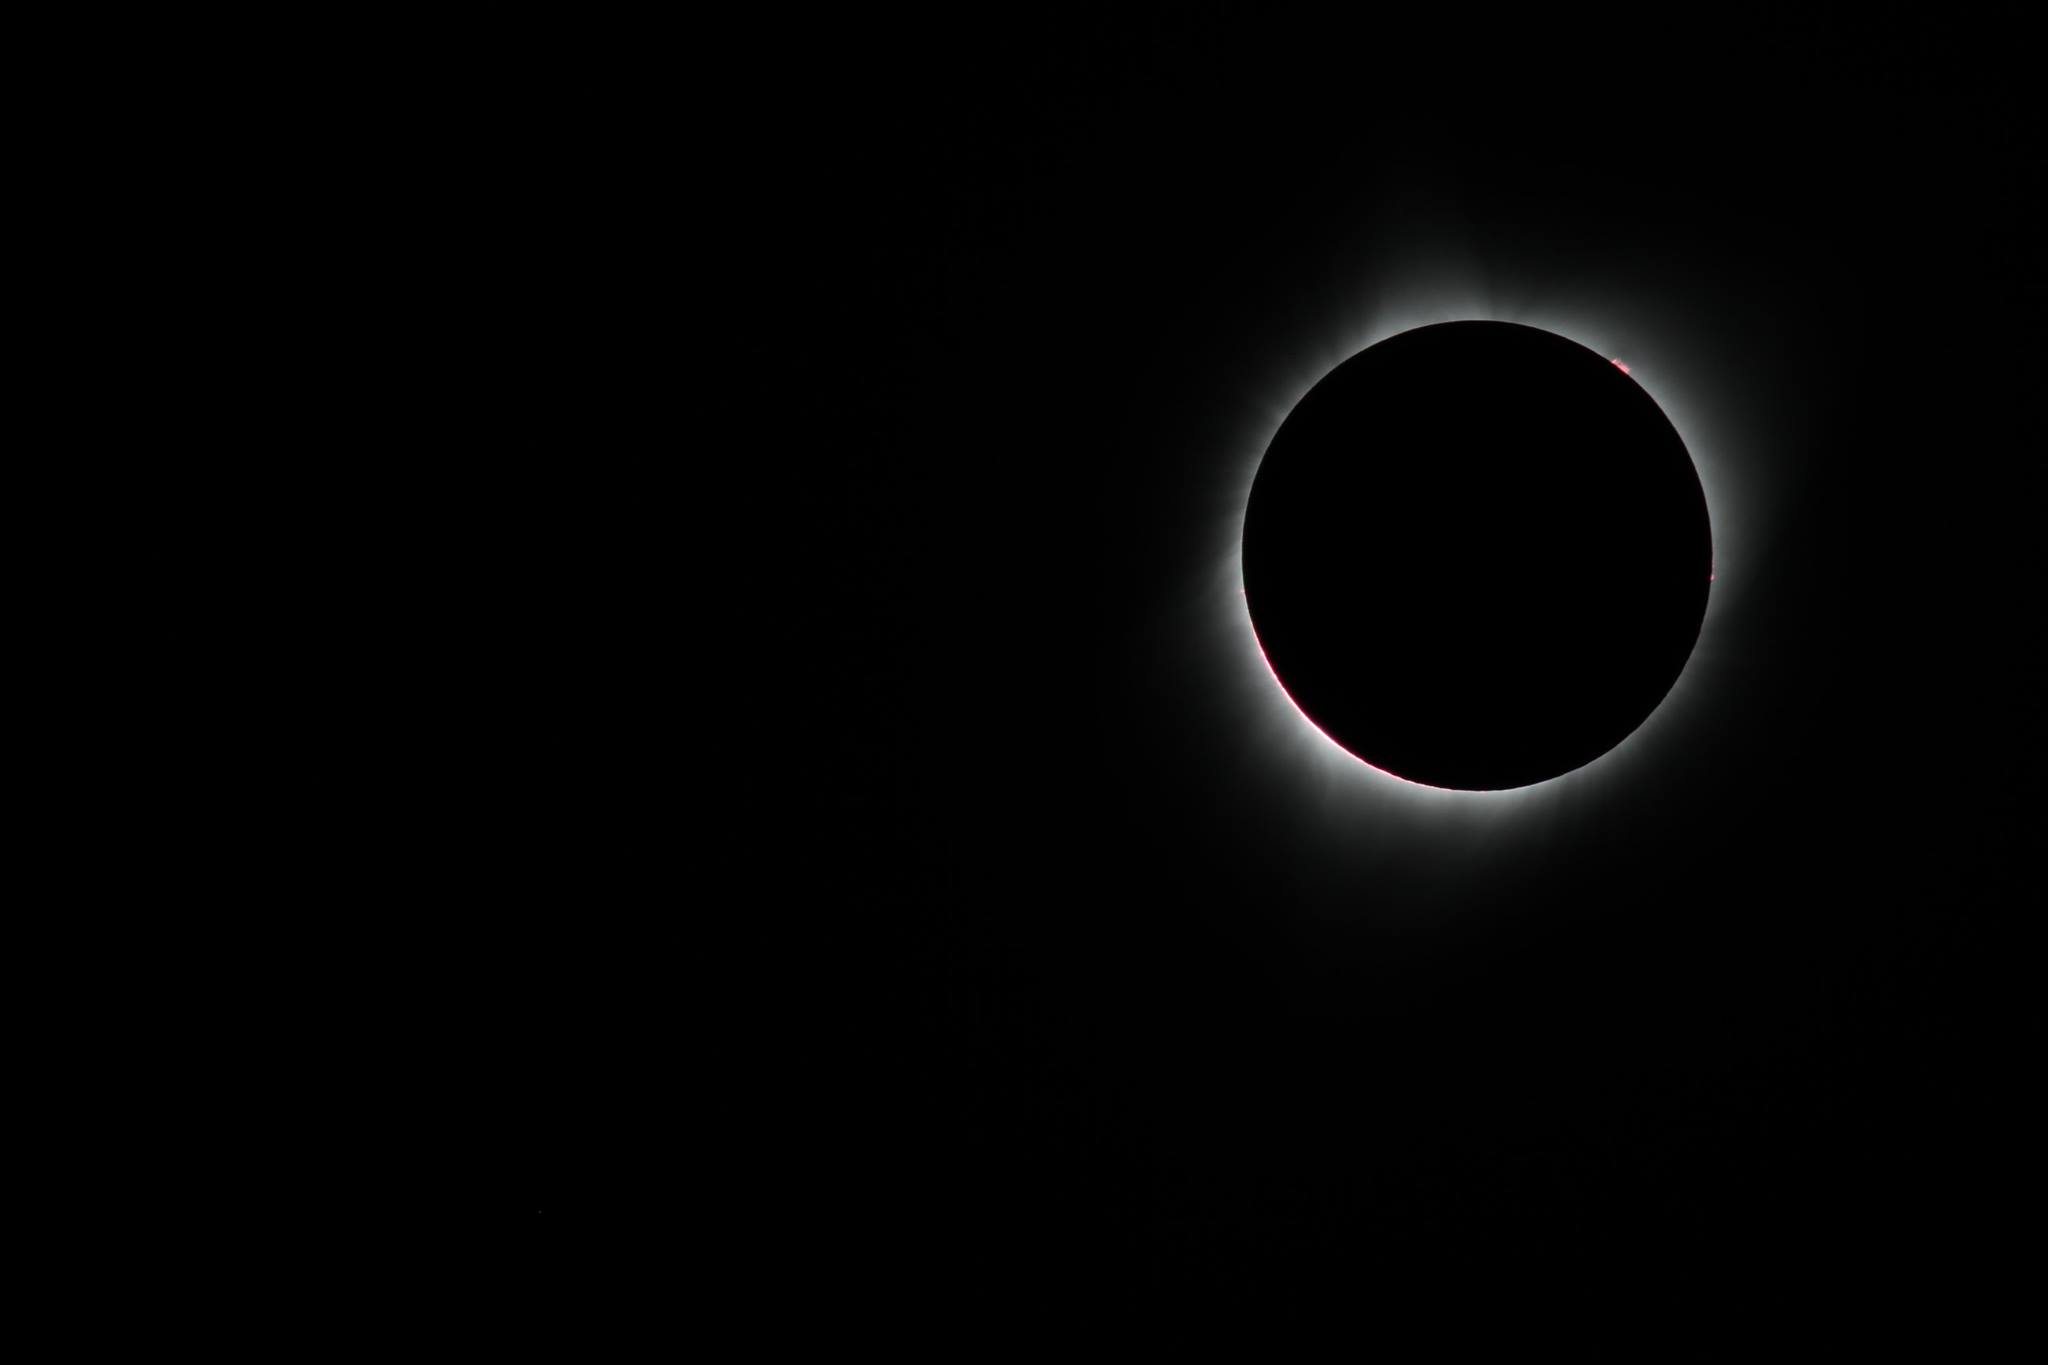 a solar eclipse where the moon has completely blotted out the sun to black except for a faint white glow at the edge and a small reddish-pink burst at the top right